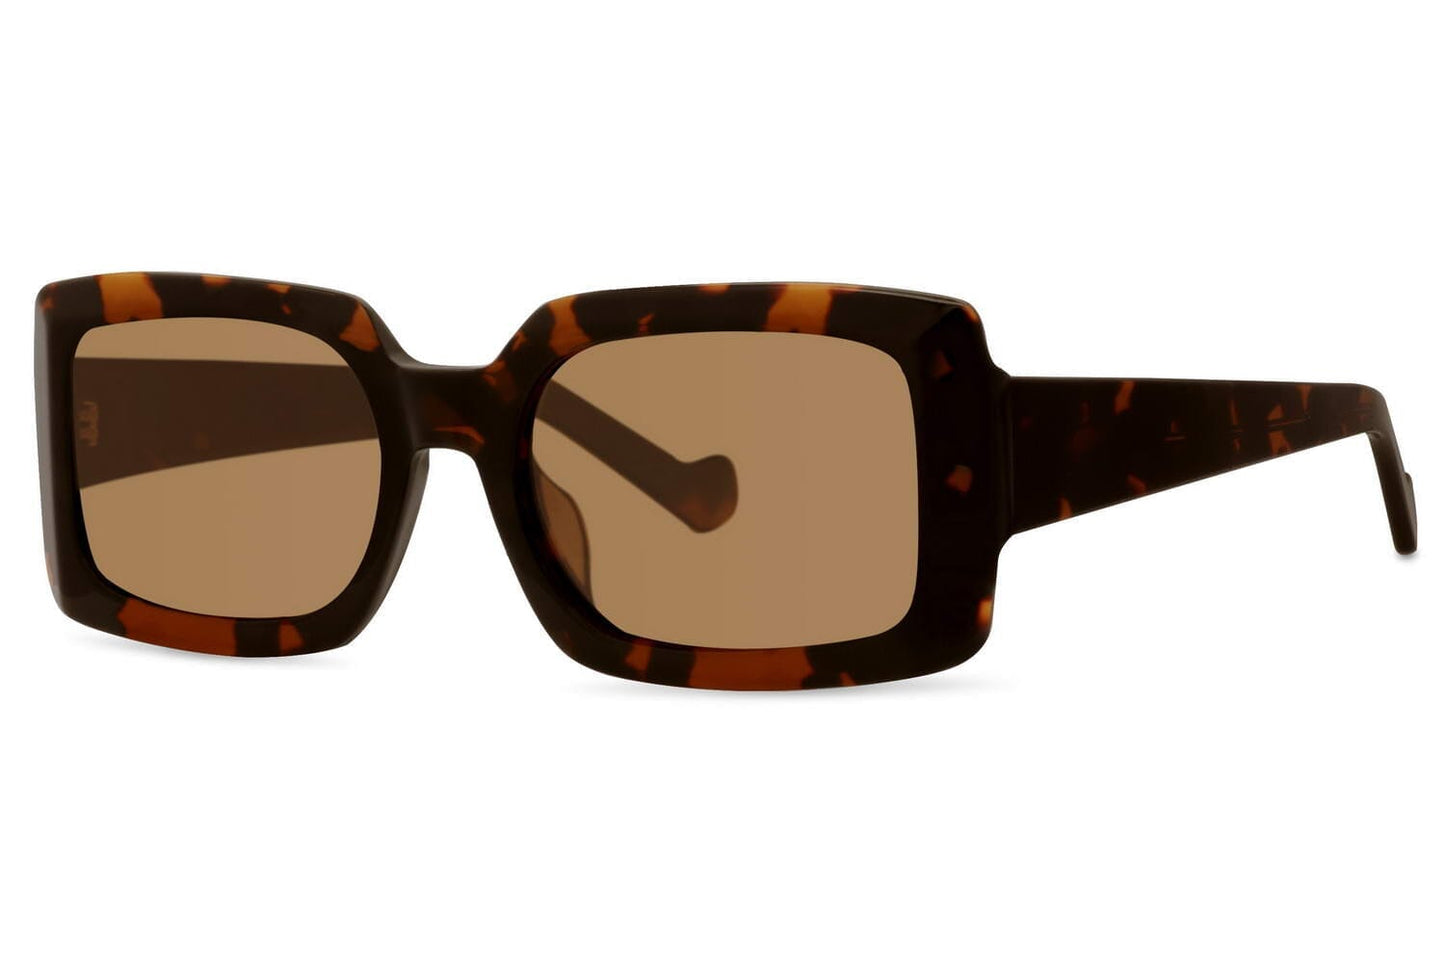 Brown frame sunglasses. UV400 protected.